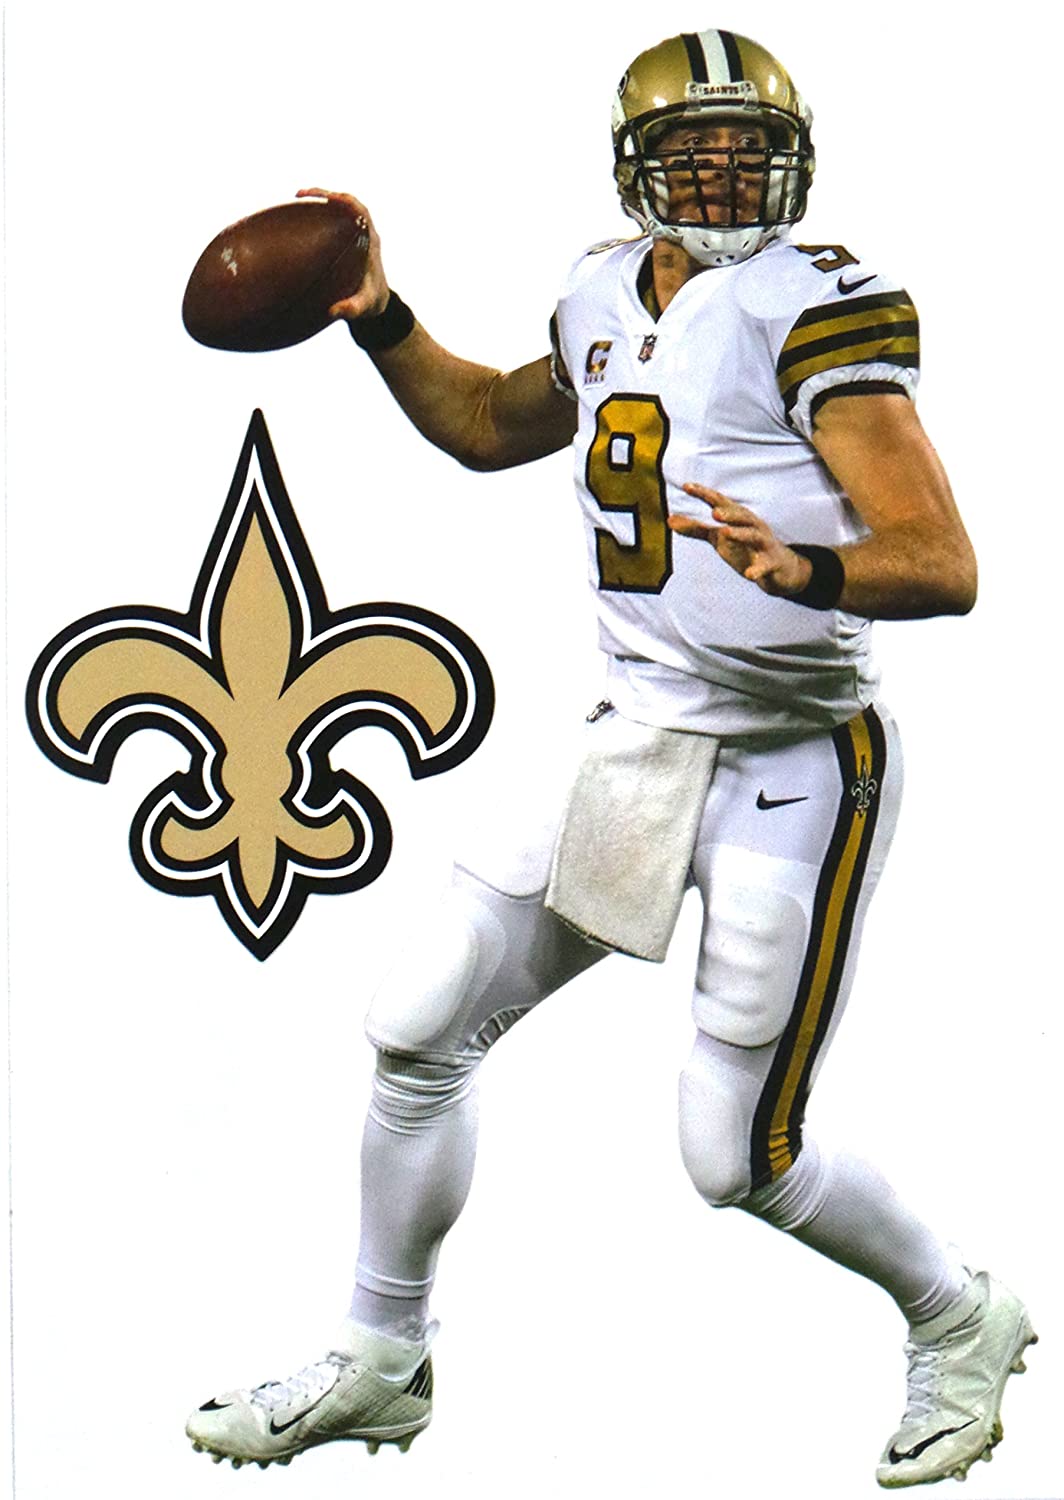 Amazon.com, Drew Brees Mini FATHEAD + New Orleans Saints LogoWhite Jersey Official NFL Vinyl Wall Graphics 7 INCH, Wall Decor Stickers, Sports & Outdoors